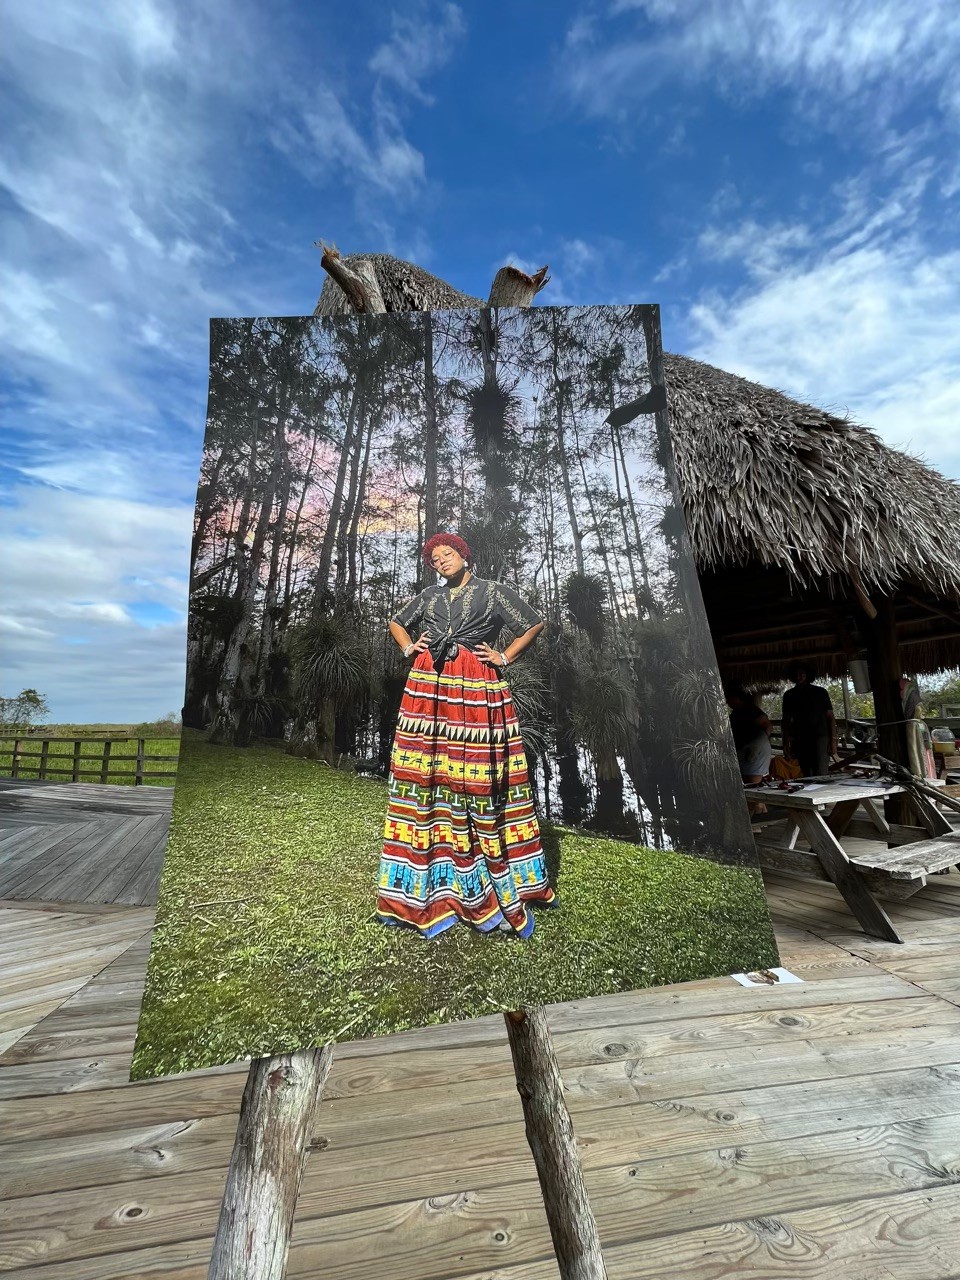 A large photo of a Black and Indigenous person posing on green land with trees behind them is placed on a stand on top of a wooden structure.